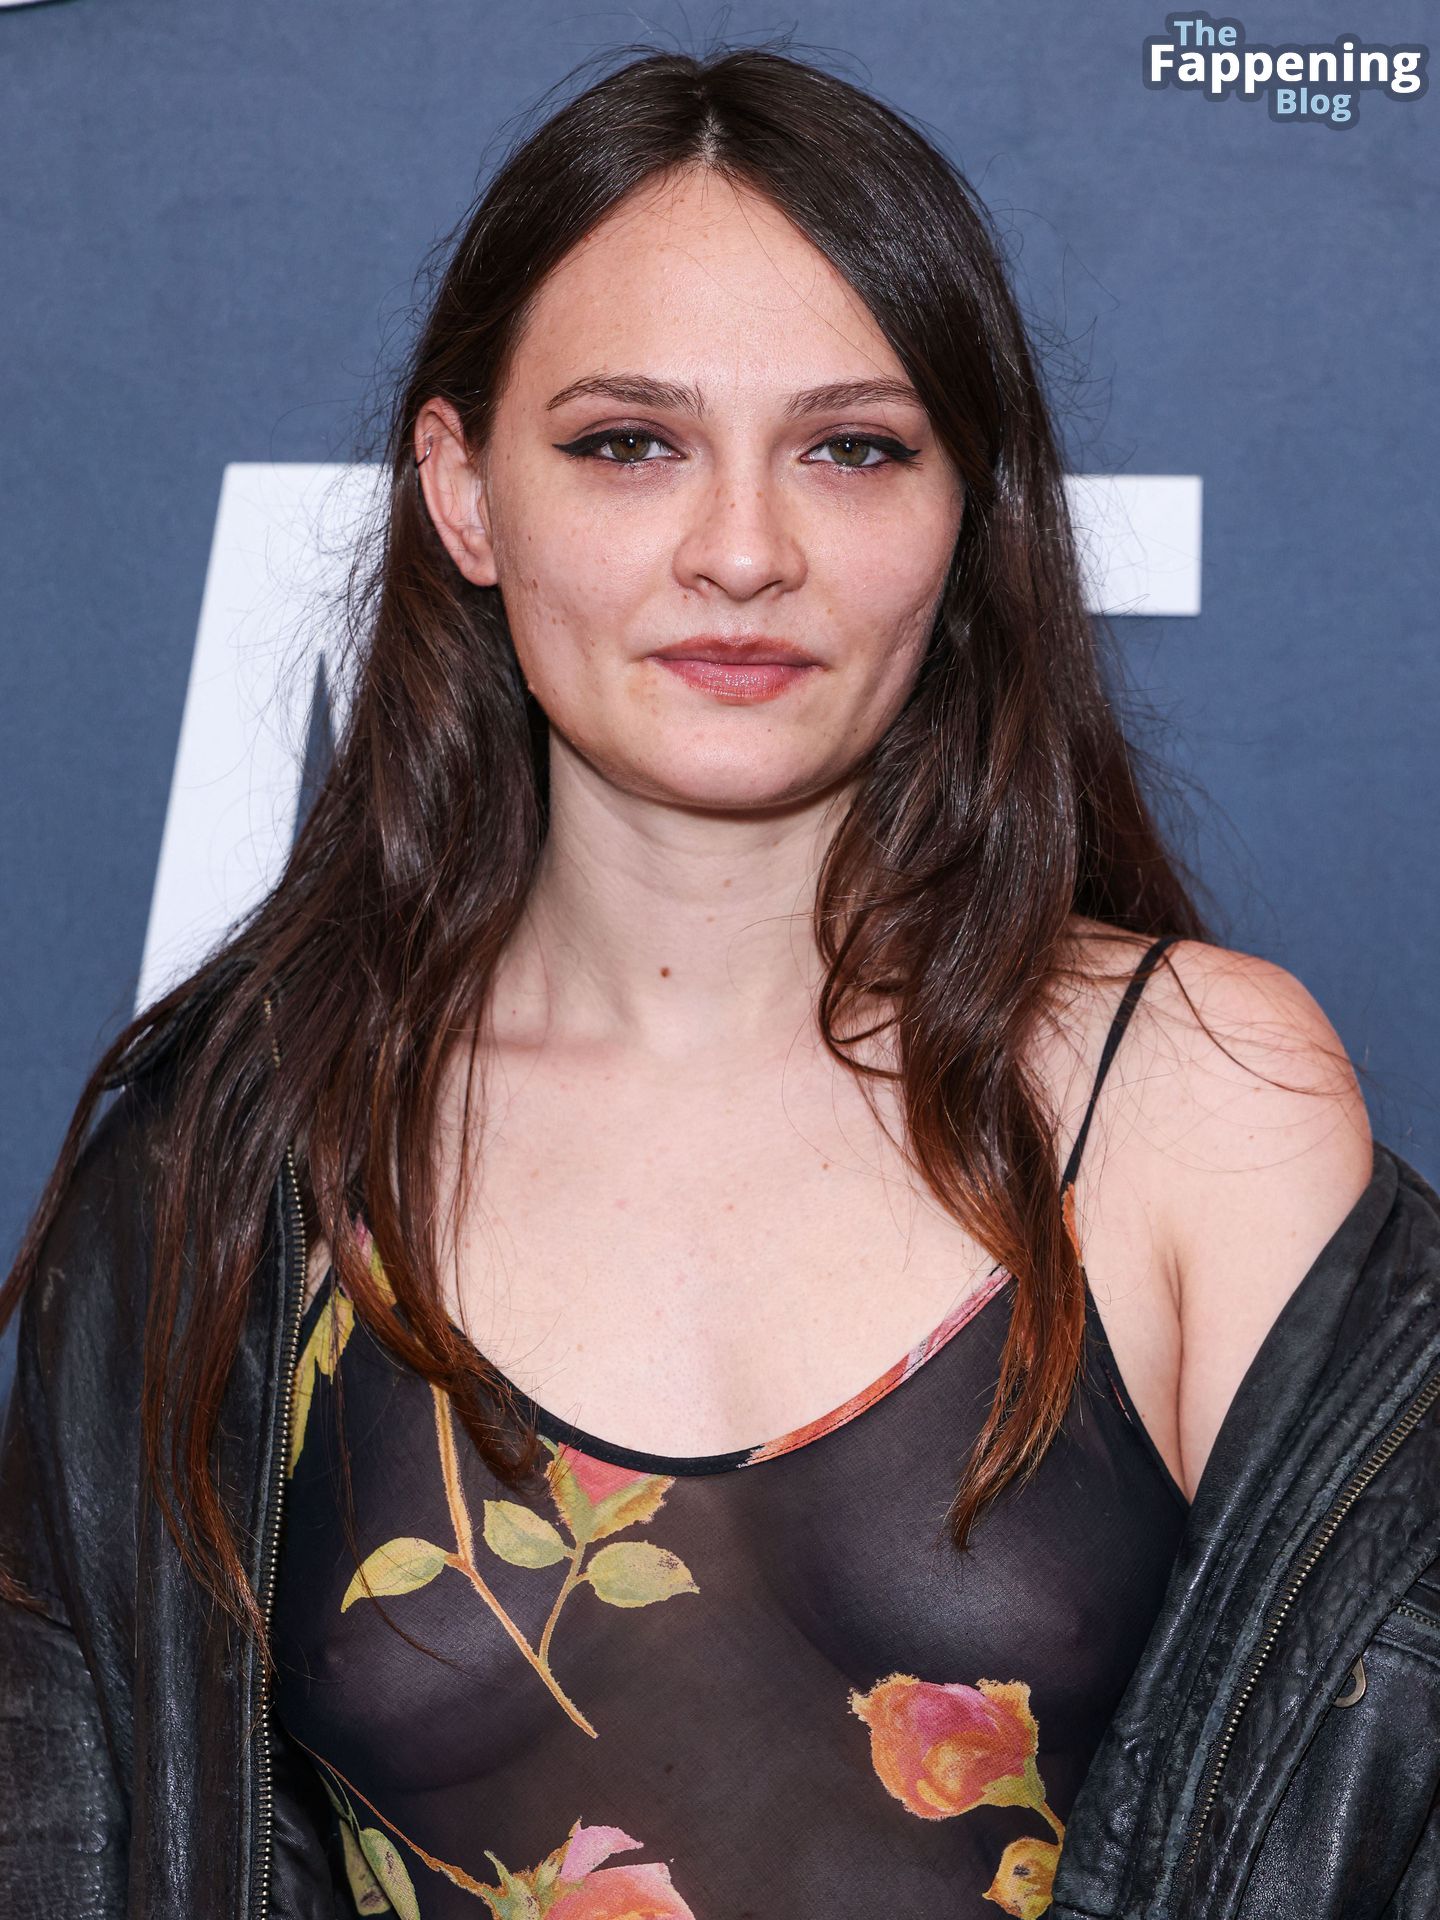 Clementine Creevy Displays Her Tits in a Sheer Dress at “The Greatest Hits” Premiere (11 Photos)